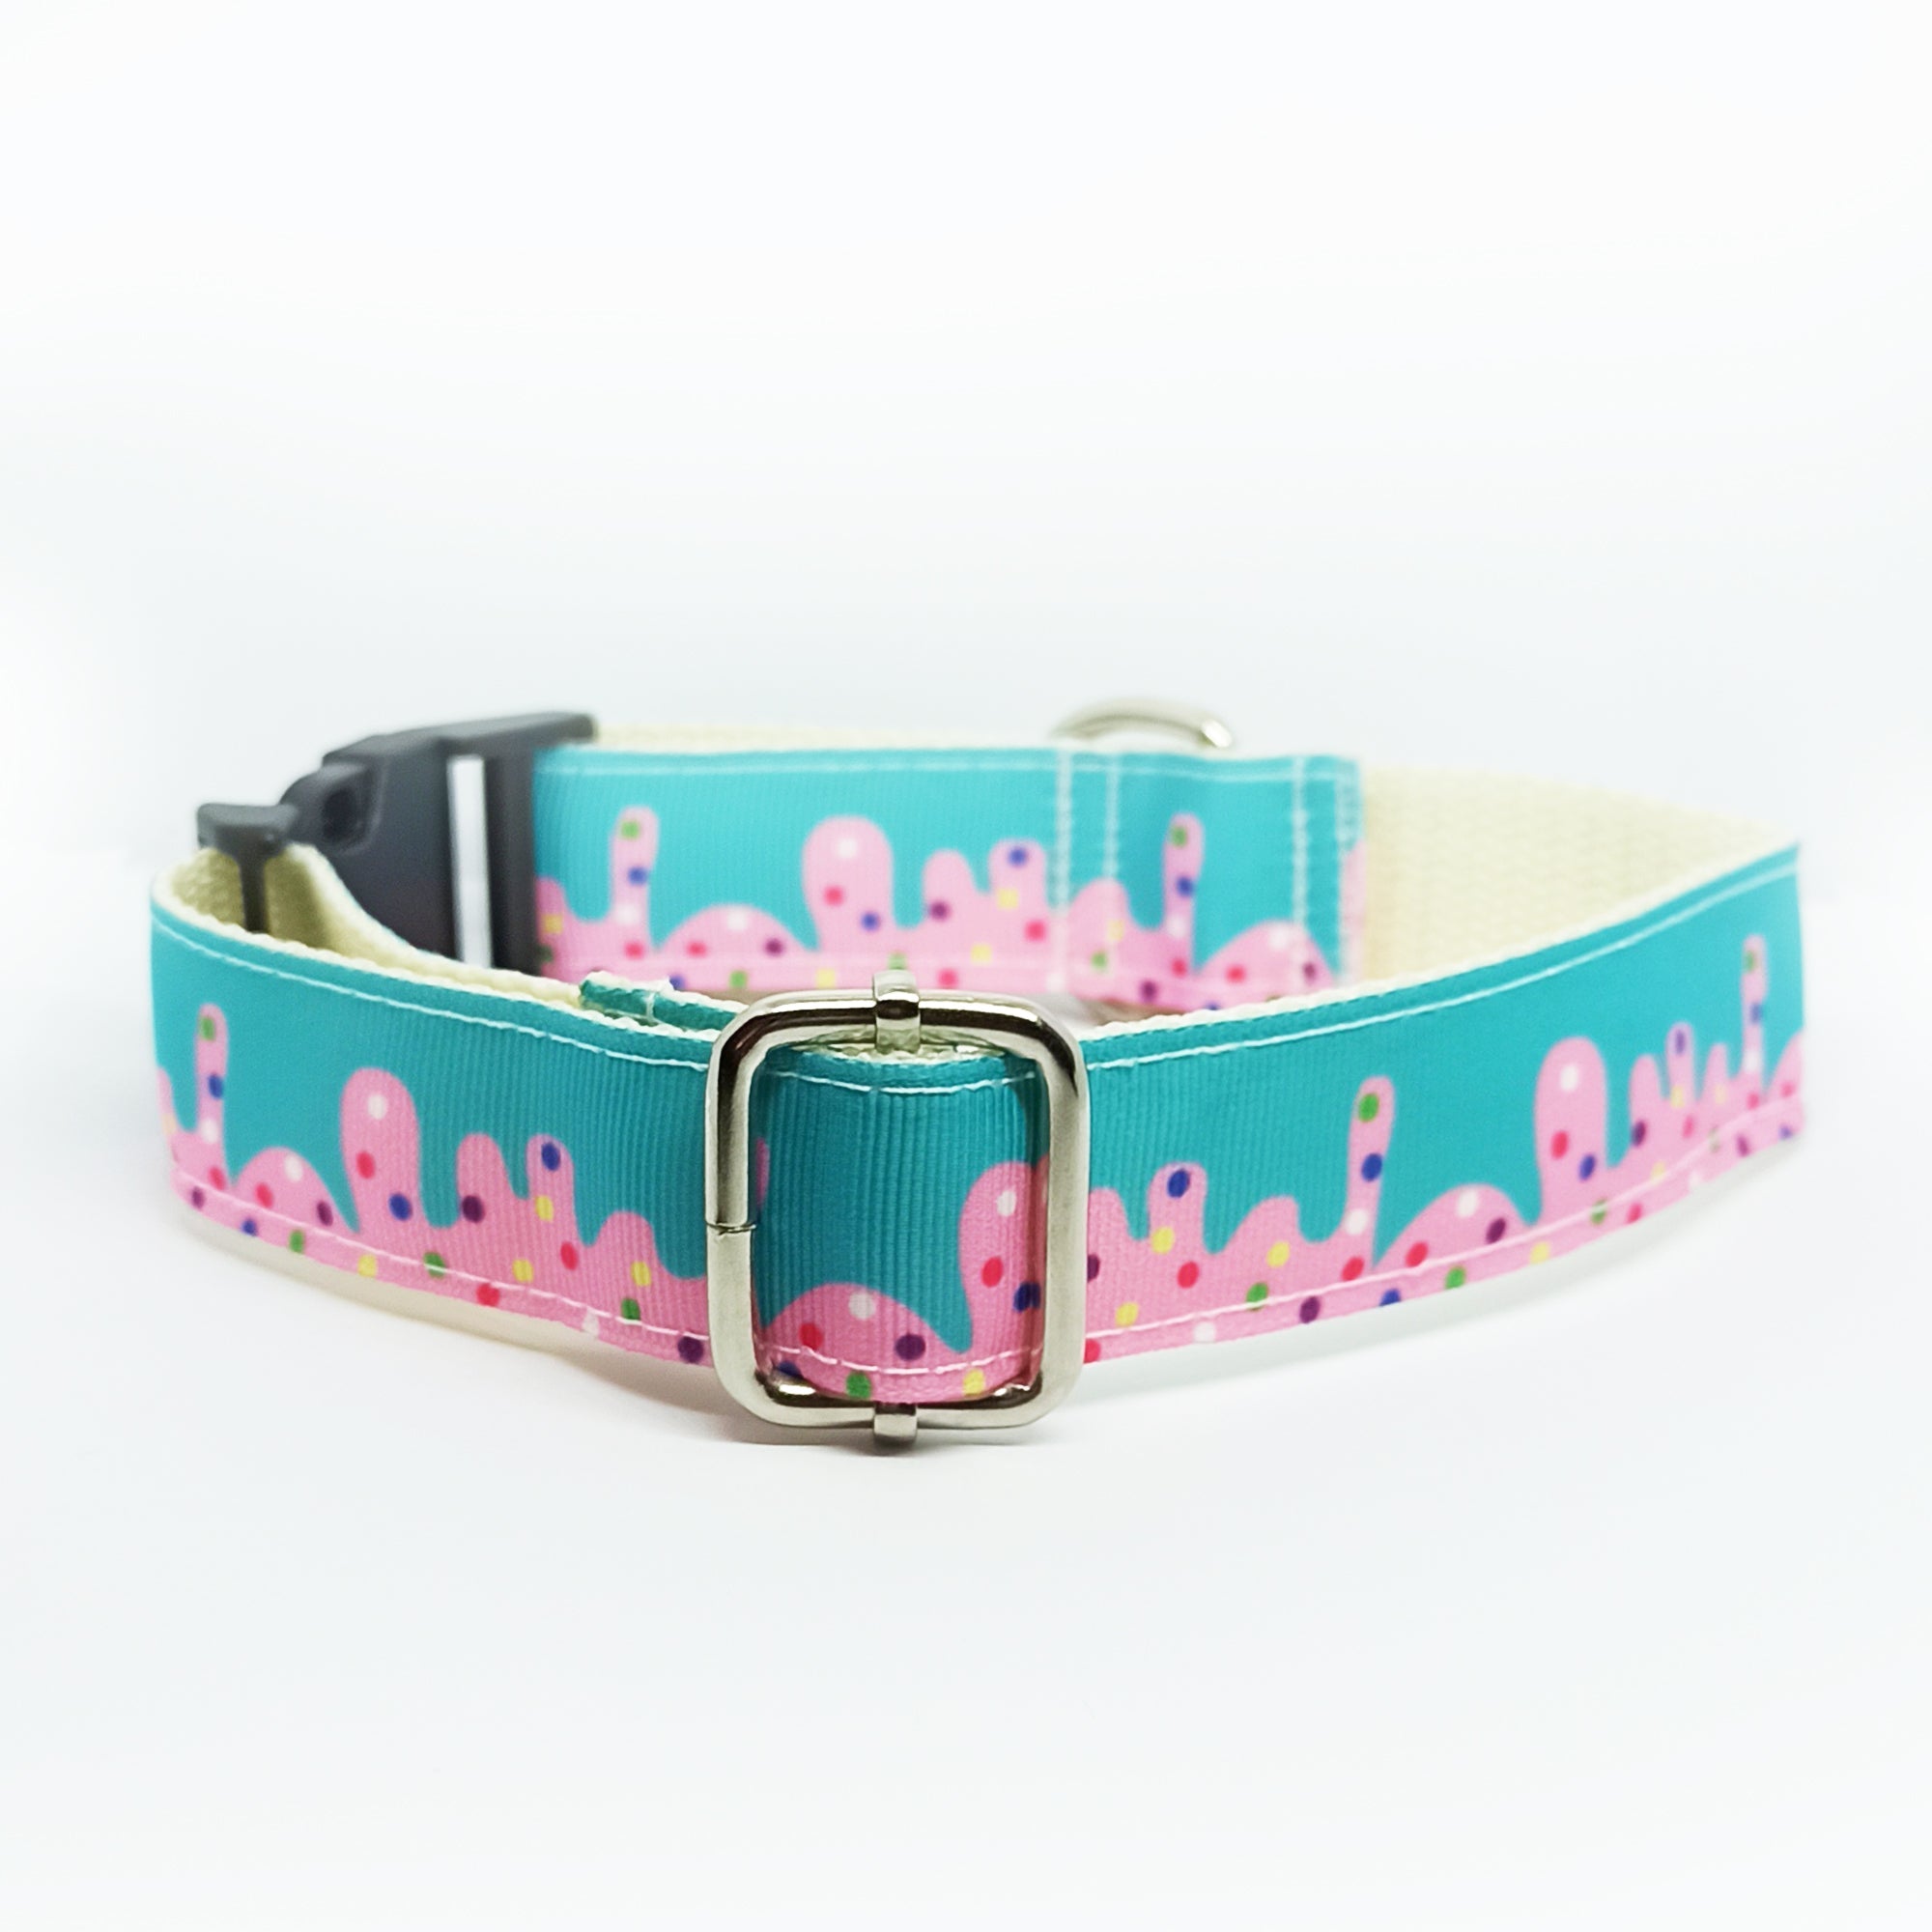 Sweet Ice Cream Blue Dog Collar - S-L sizes with custom matching pet tag - Adventures of Rubi